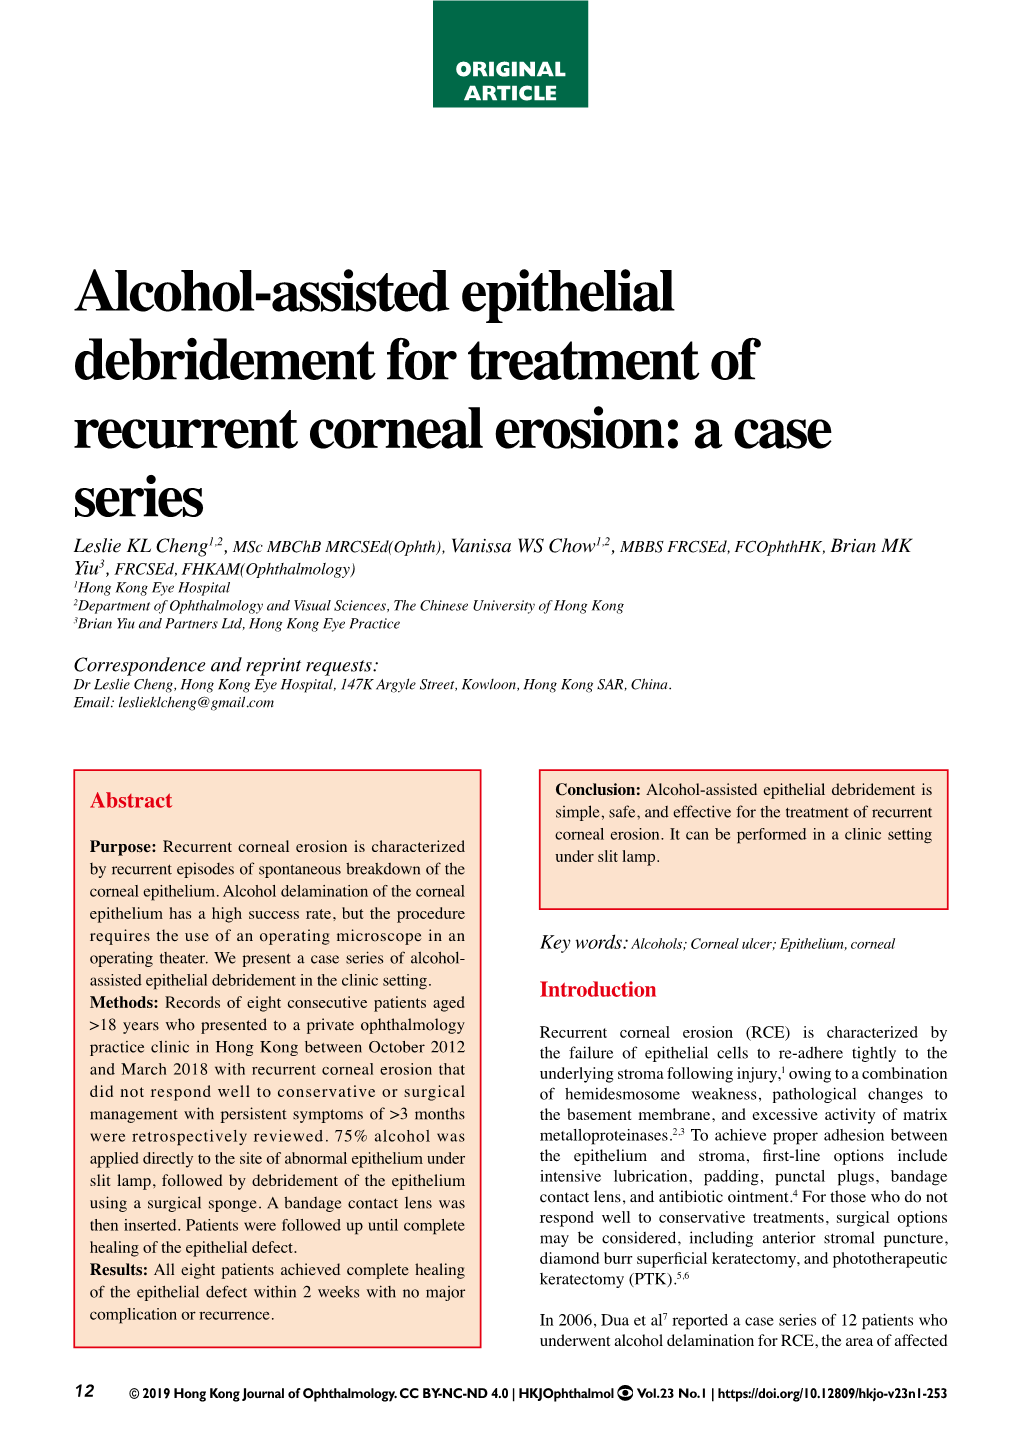 Alcohol-Assisted Epithelial Debridement for Treatment Of